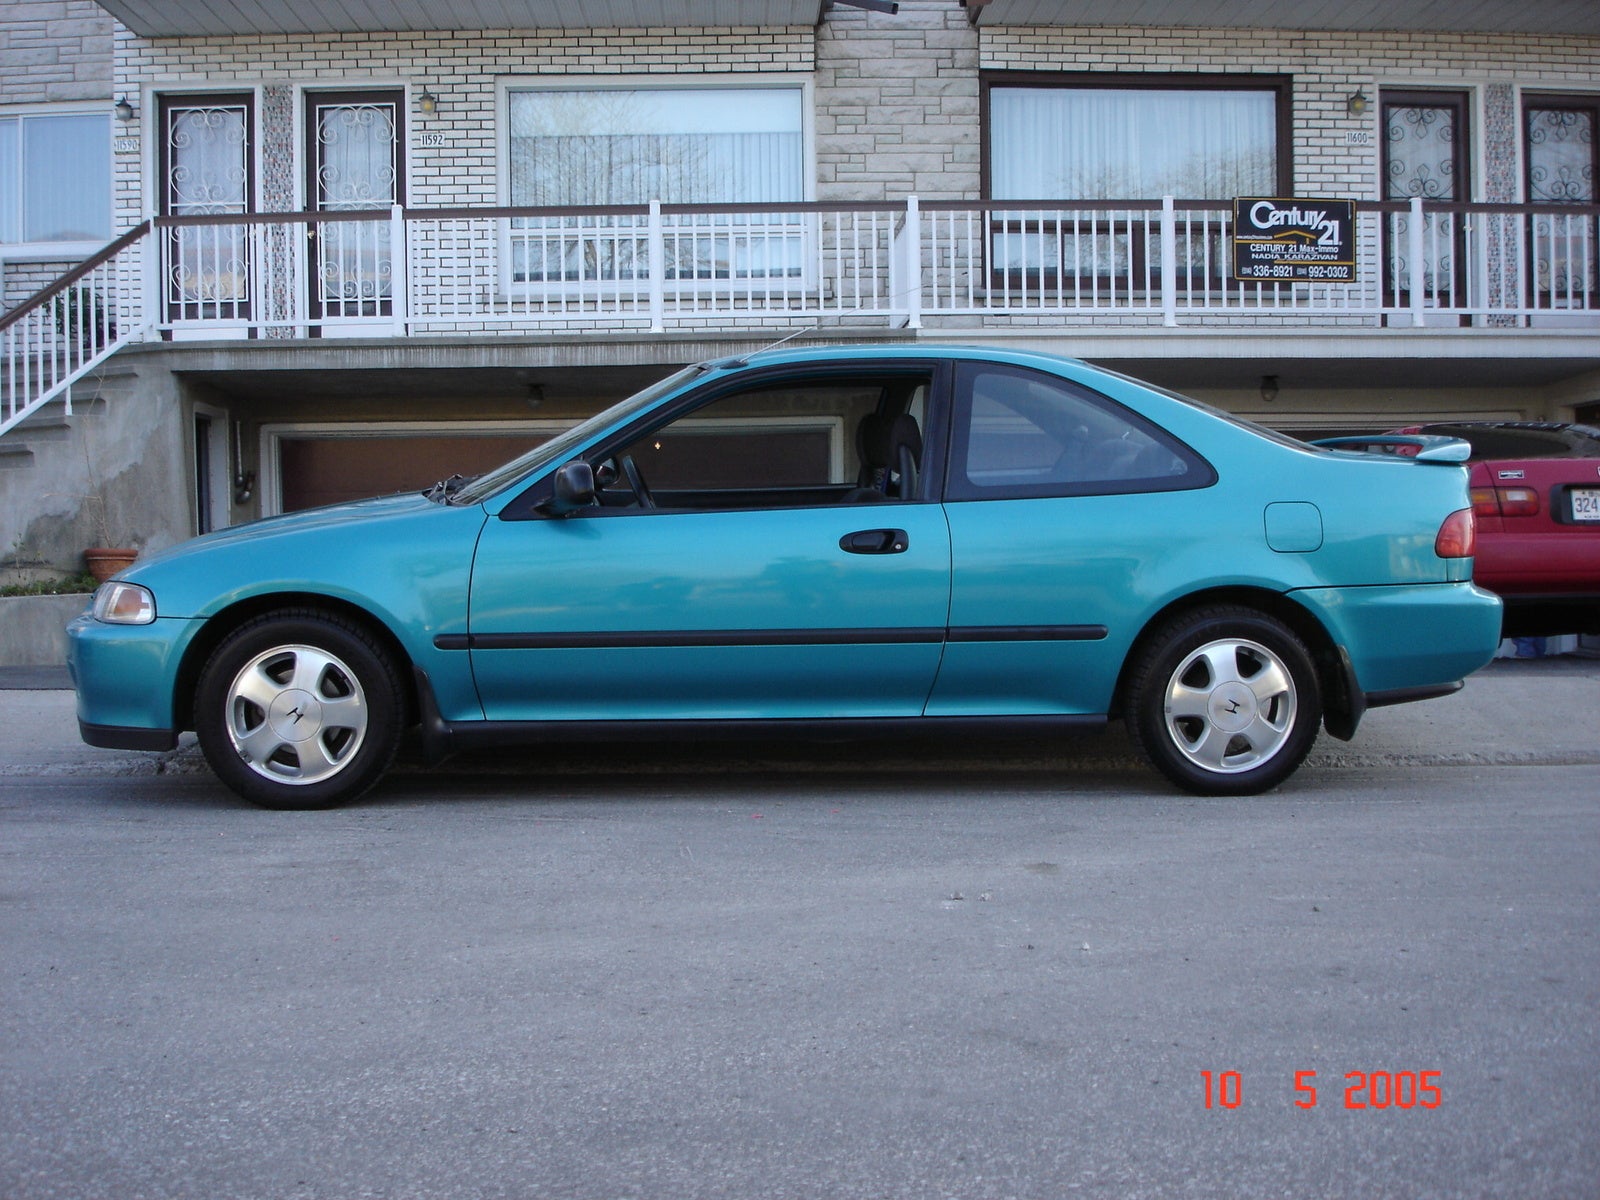 Pictures of a 1993 honda cvic coupe